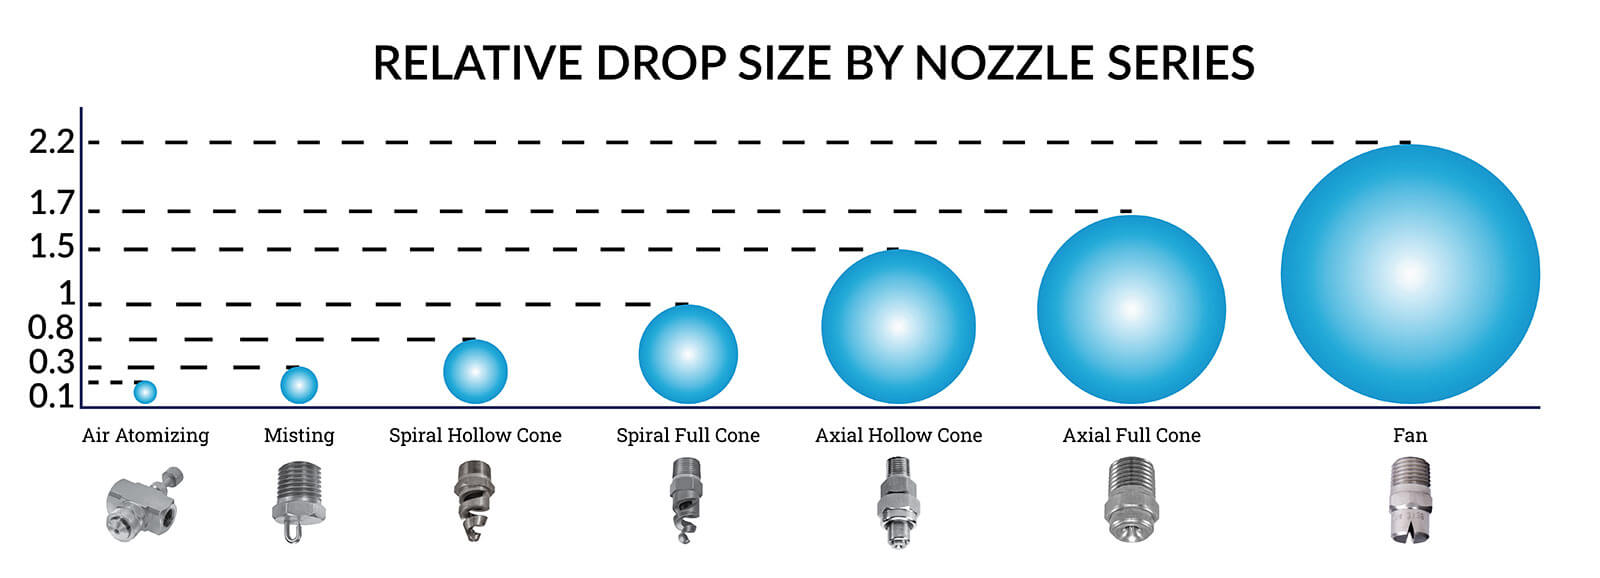 Detail of Relative Drop Size by Nozzle Series